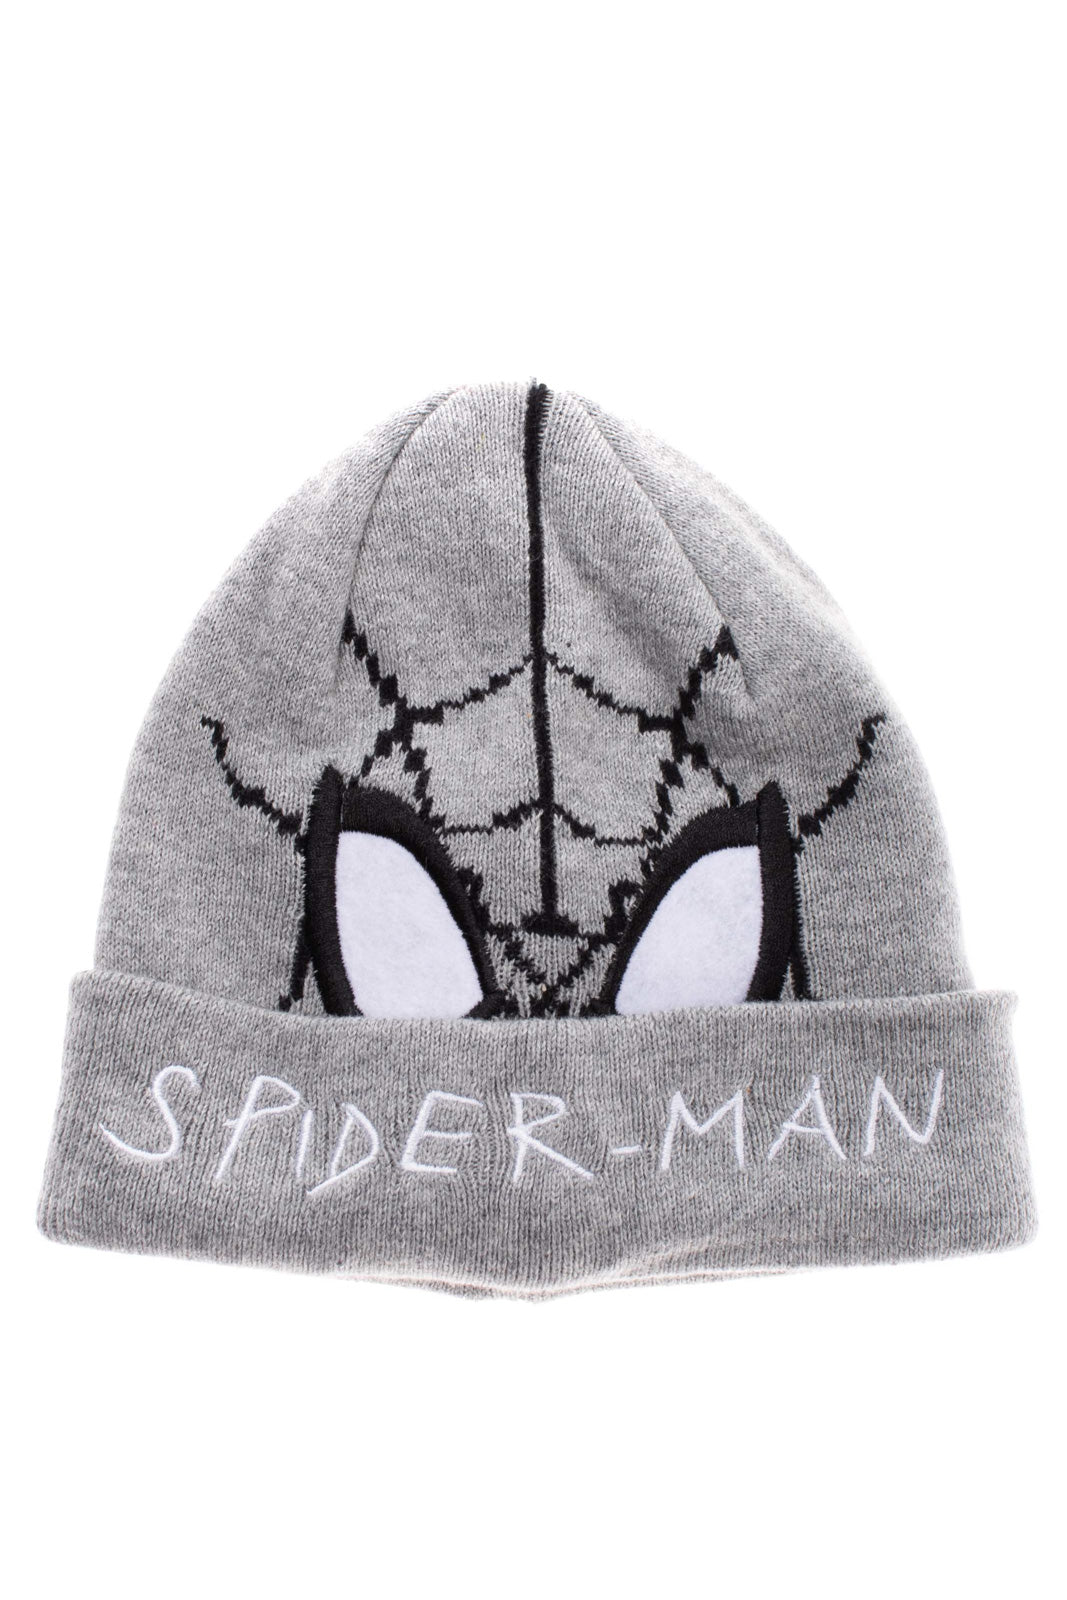 NAME IT x MARVEL Beanie Cap Size 6-12M Embroidered 'SPIDER-MAN' Double Layered gallery main photo